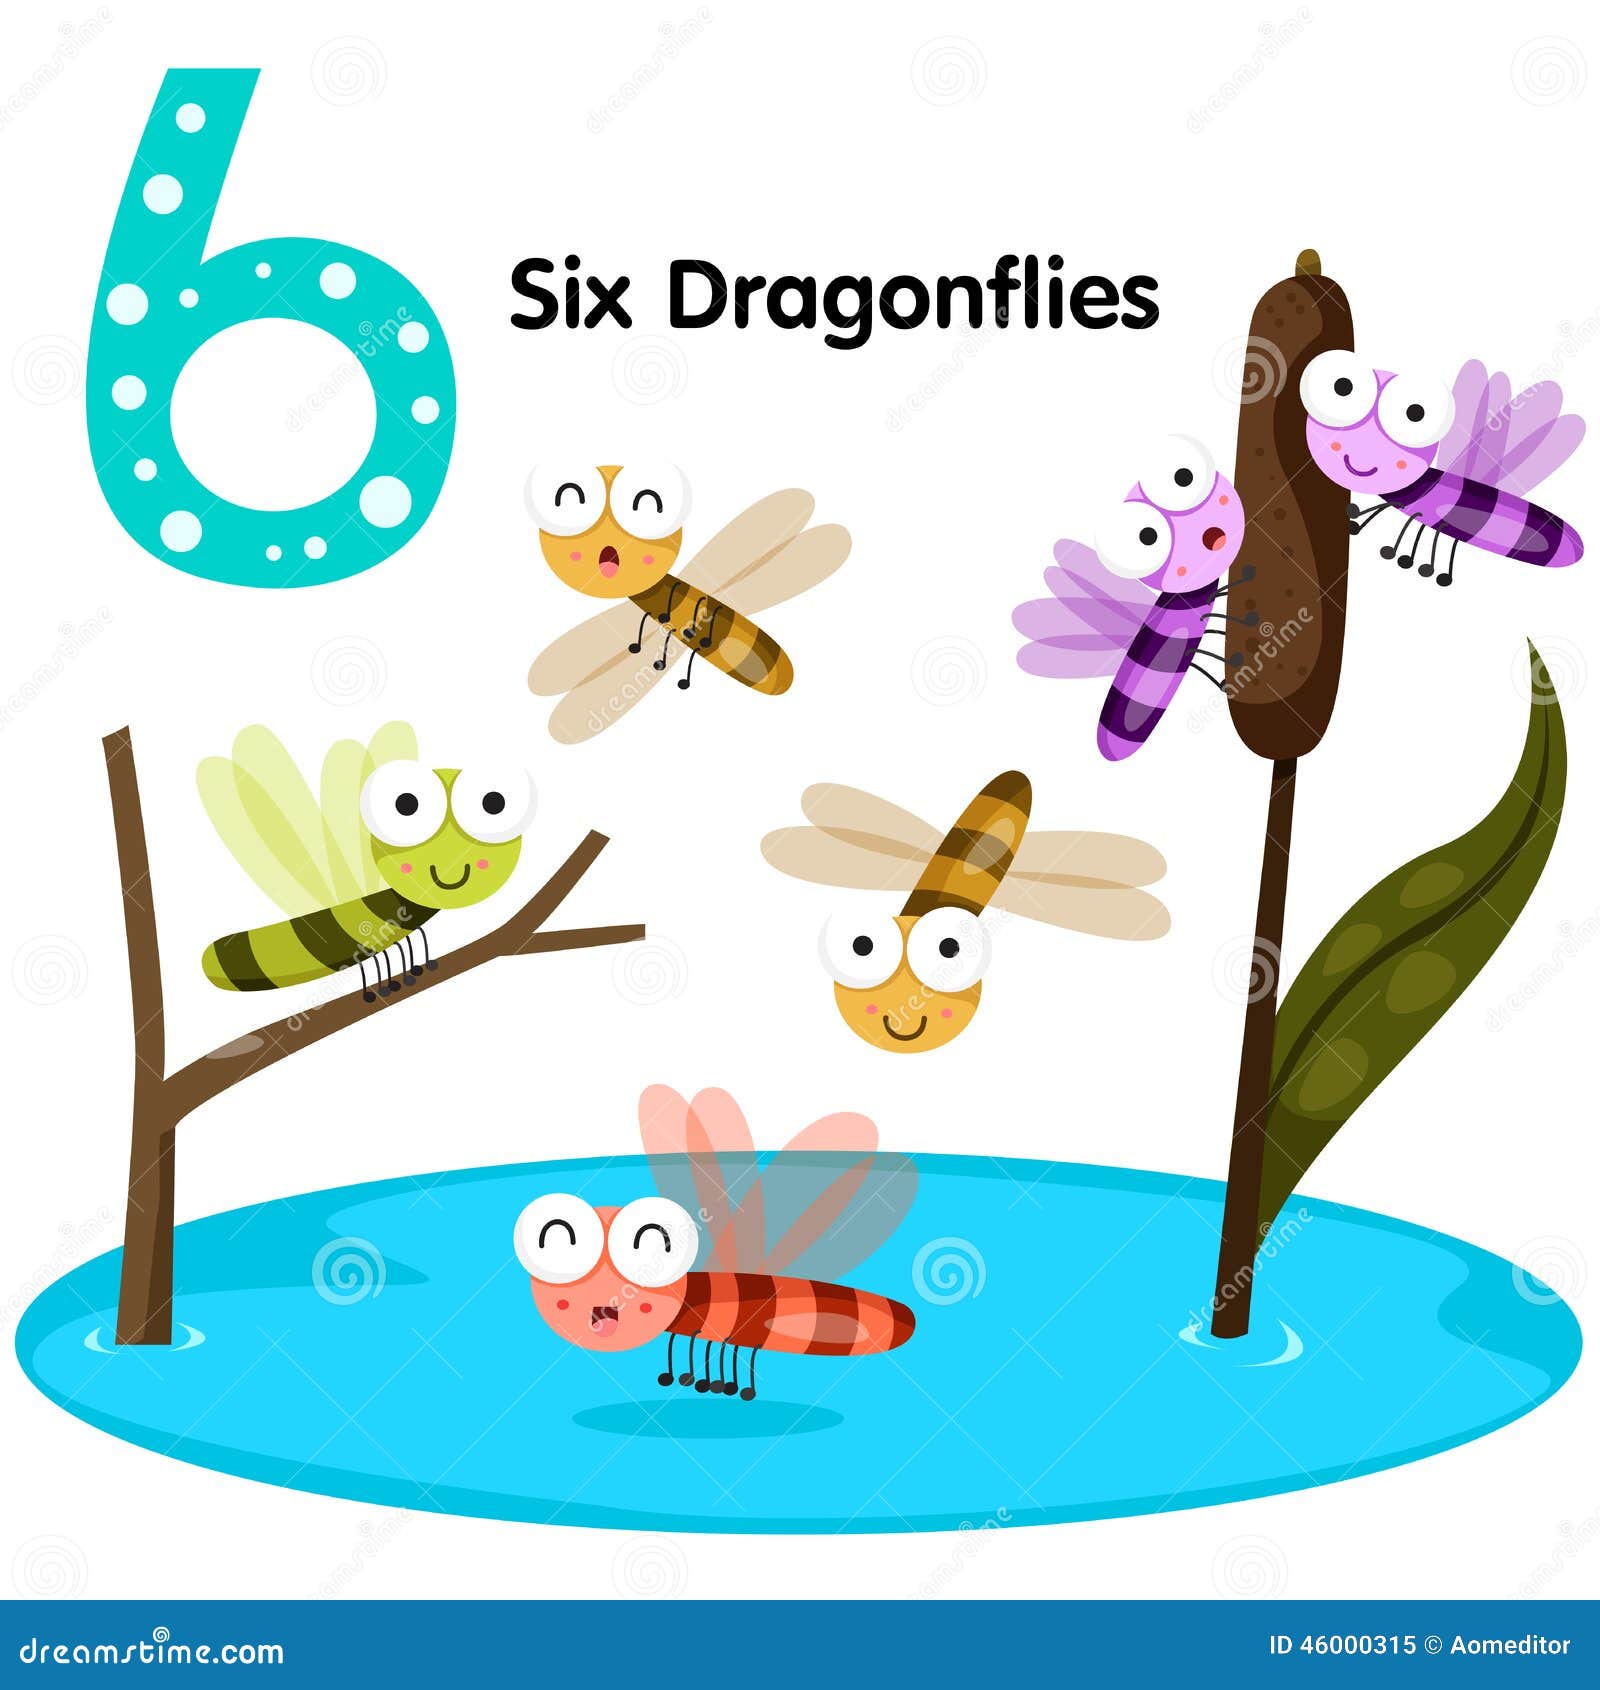 illustrator of number six dragonfly